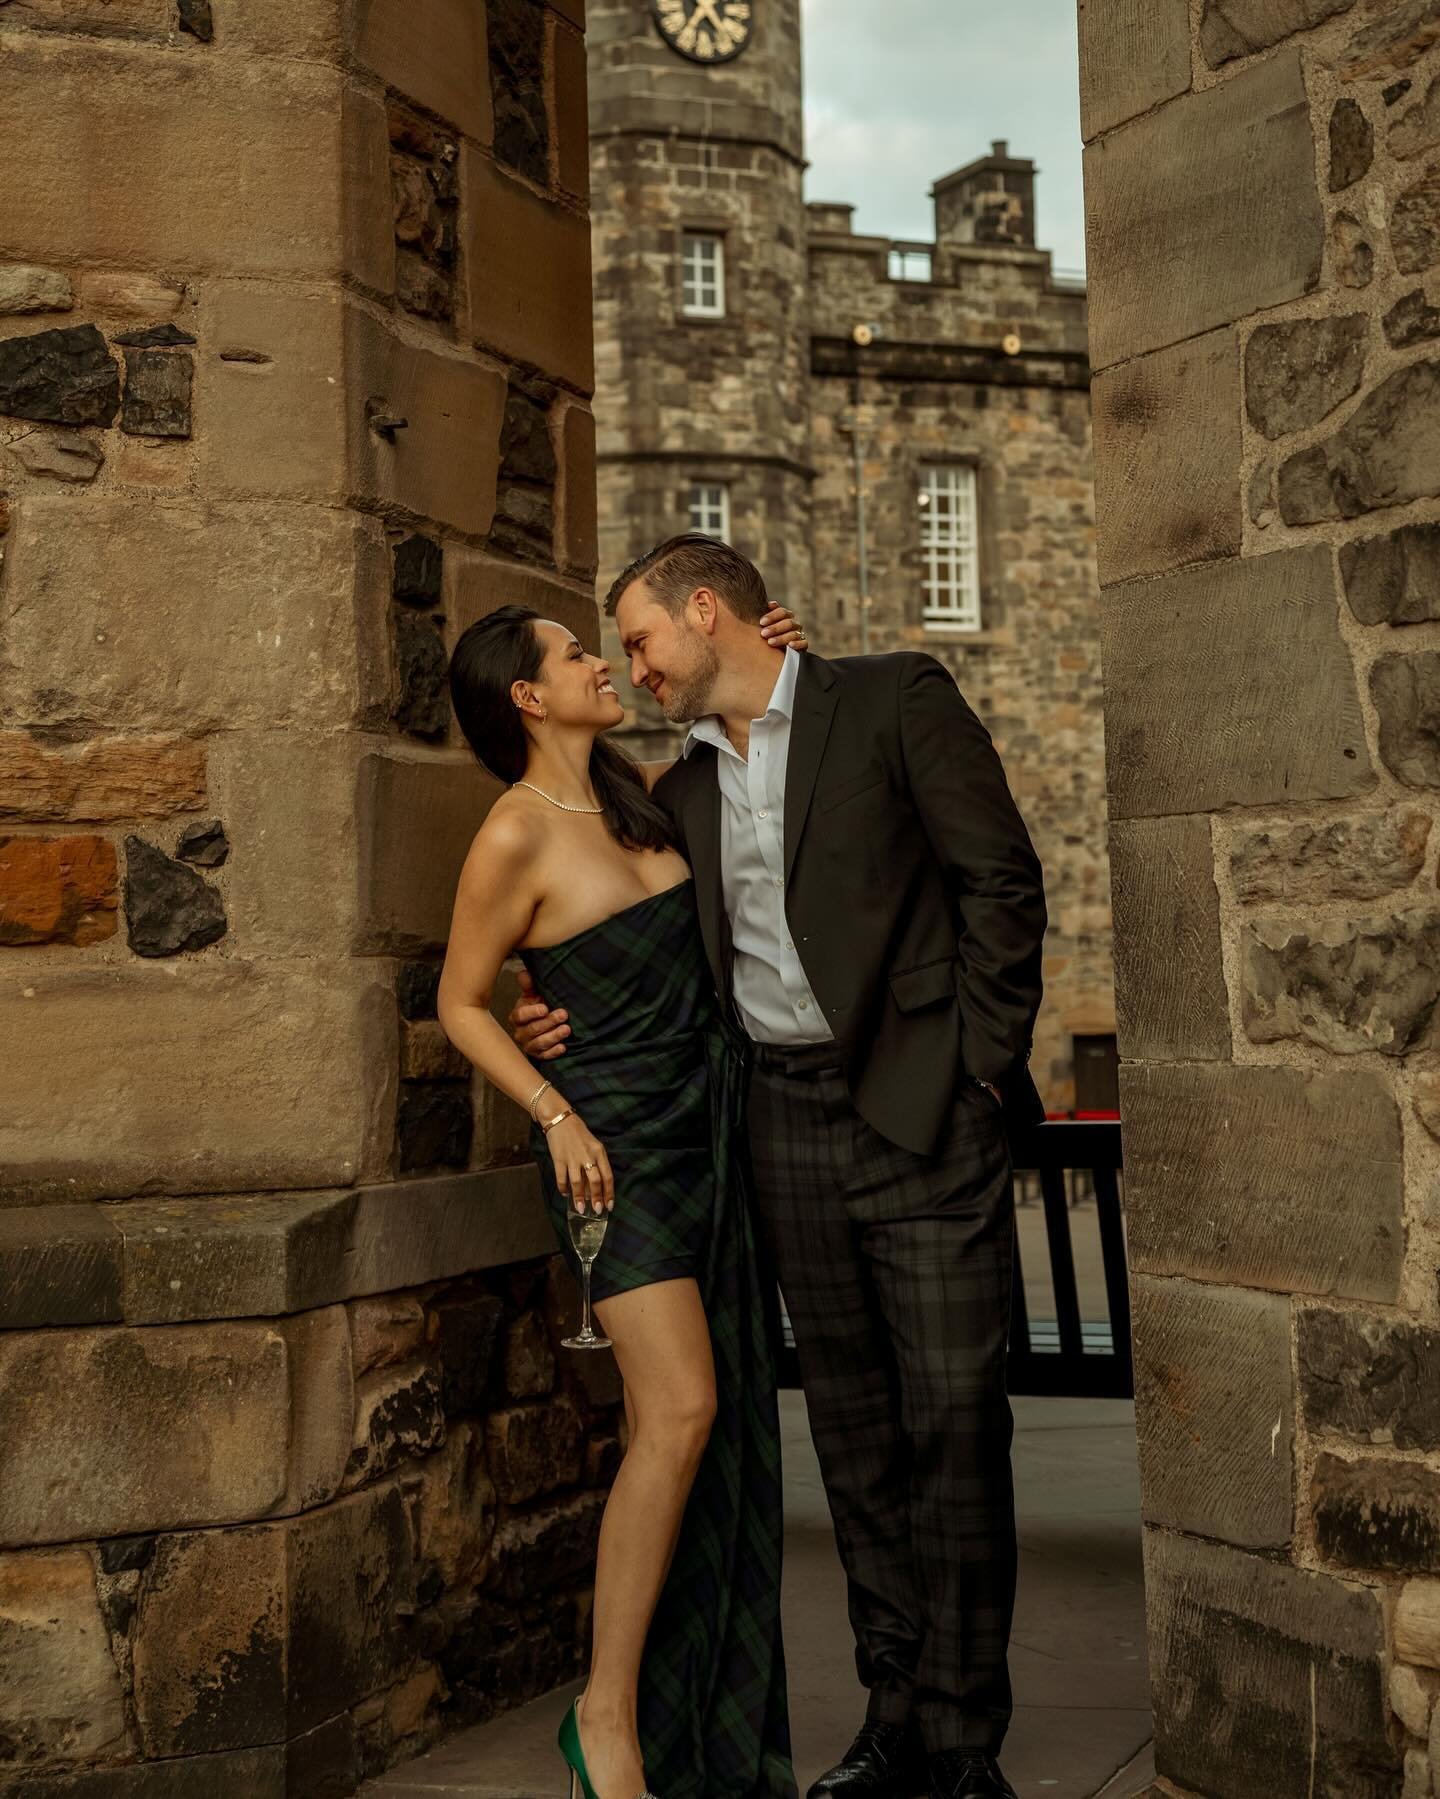 Did you know you can get married in @edinburghcastle ? 
Here are some photos from the welcome party for this beautiful couple! 

#wedding #edinburgh #scotland #edinburghwedding #edinburghweddingphotographer #kiss #retro #elopmentphotographer #elopmen